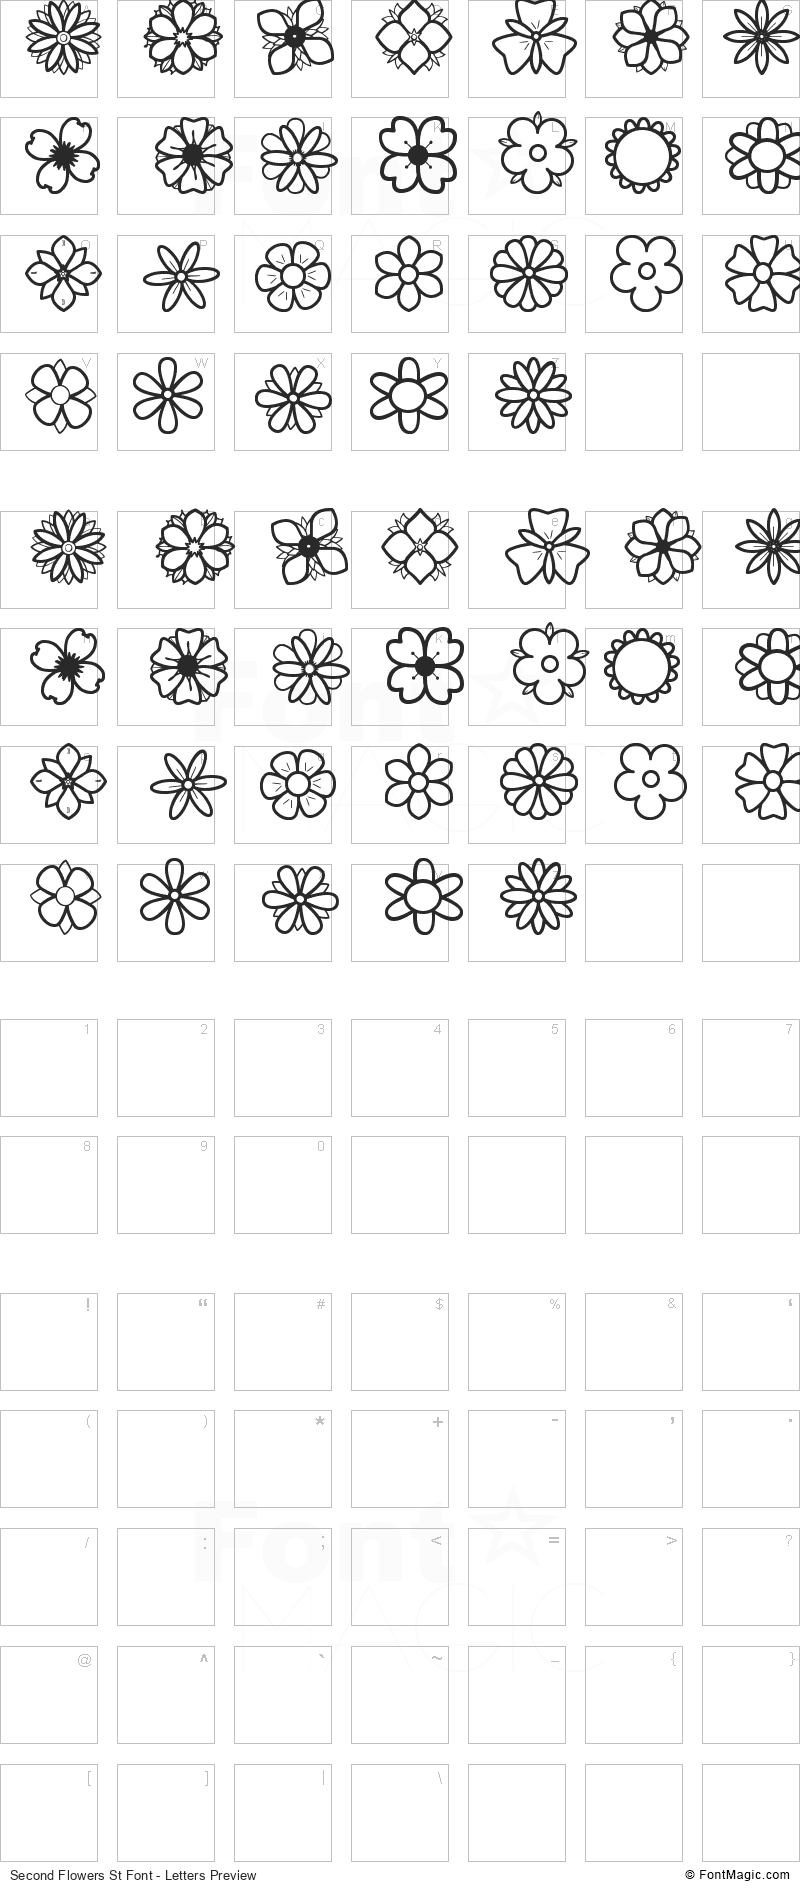 Second Flowers St Font - All Latters Preview Chart